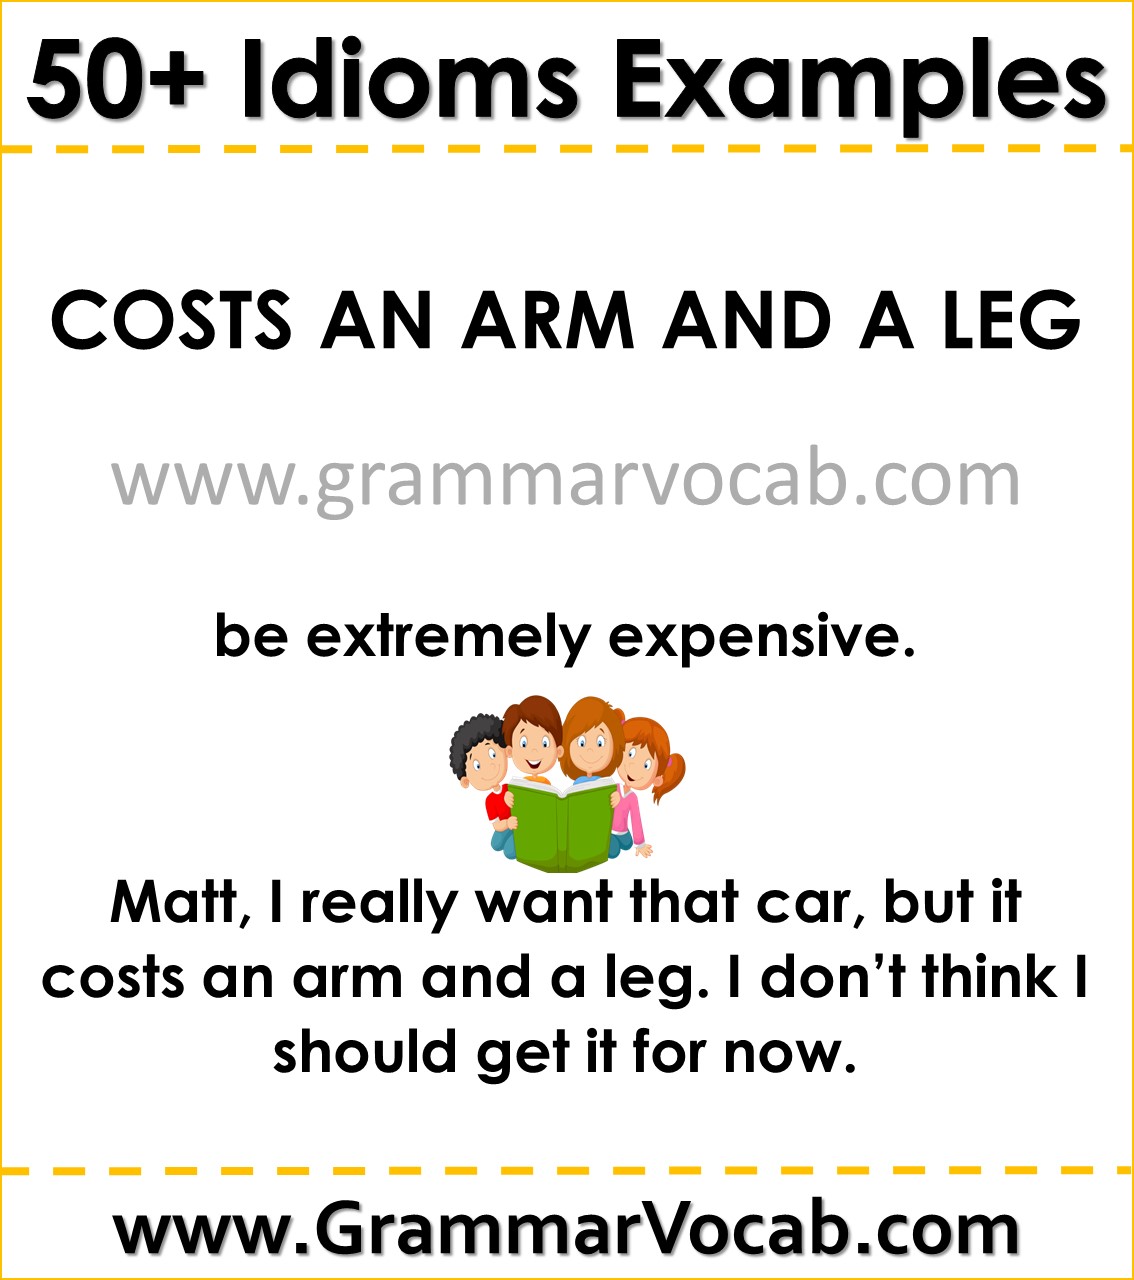 idioms with meaning and examples